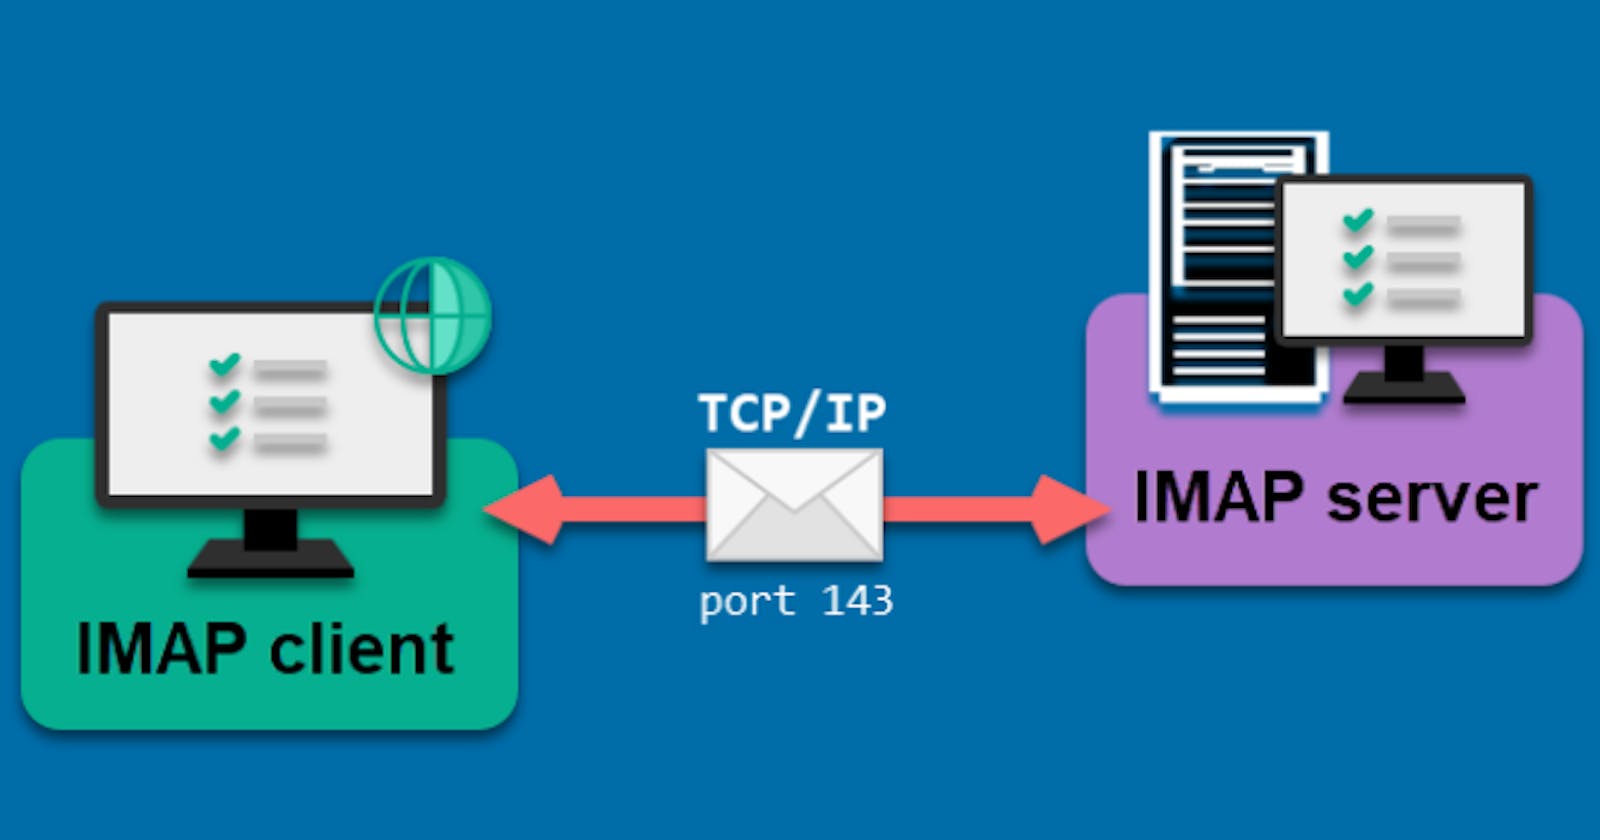 Read emails from the mail server using IMAP